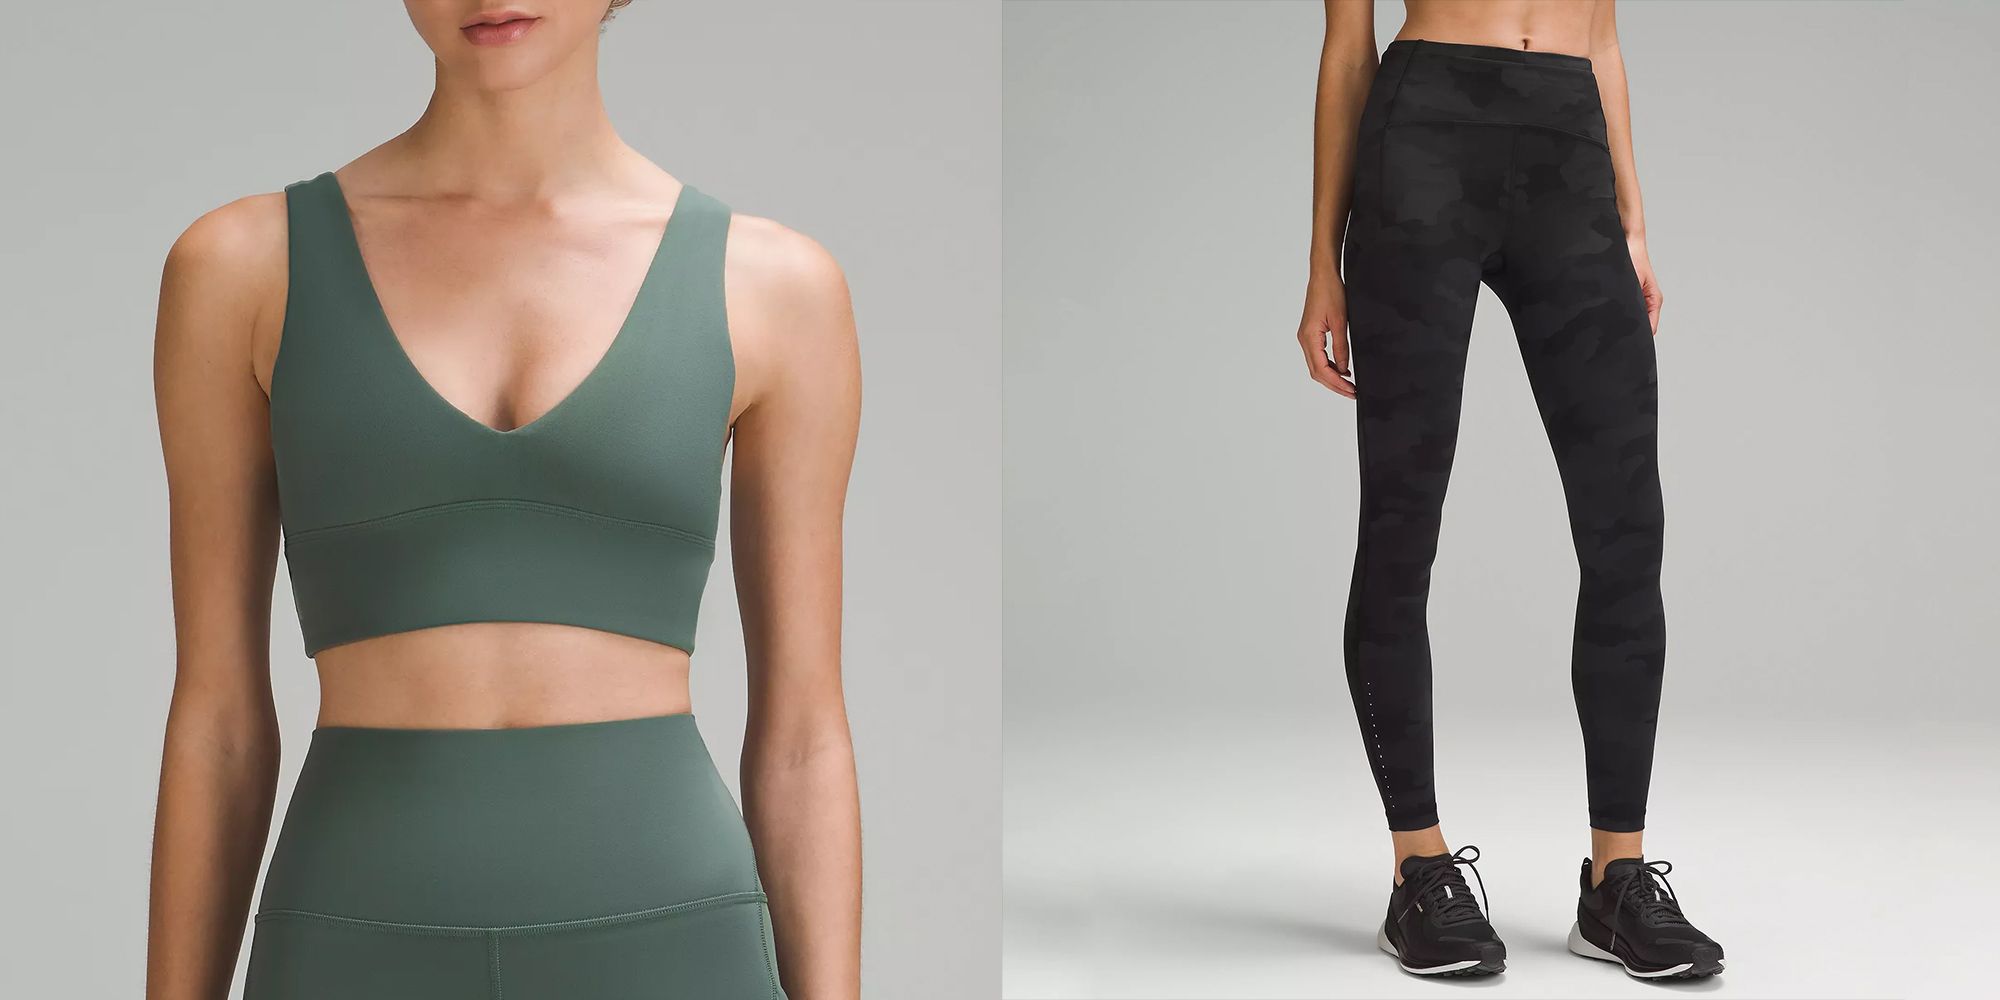 Lululemon's Mirror Workout Tool Doesn't Sell Sports Bras -- Yet